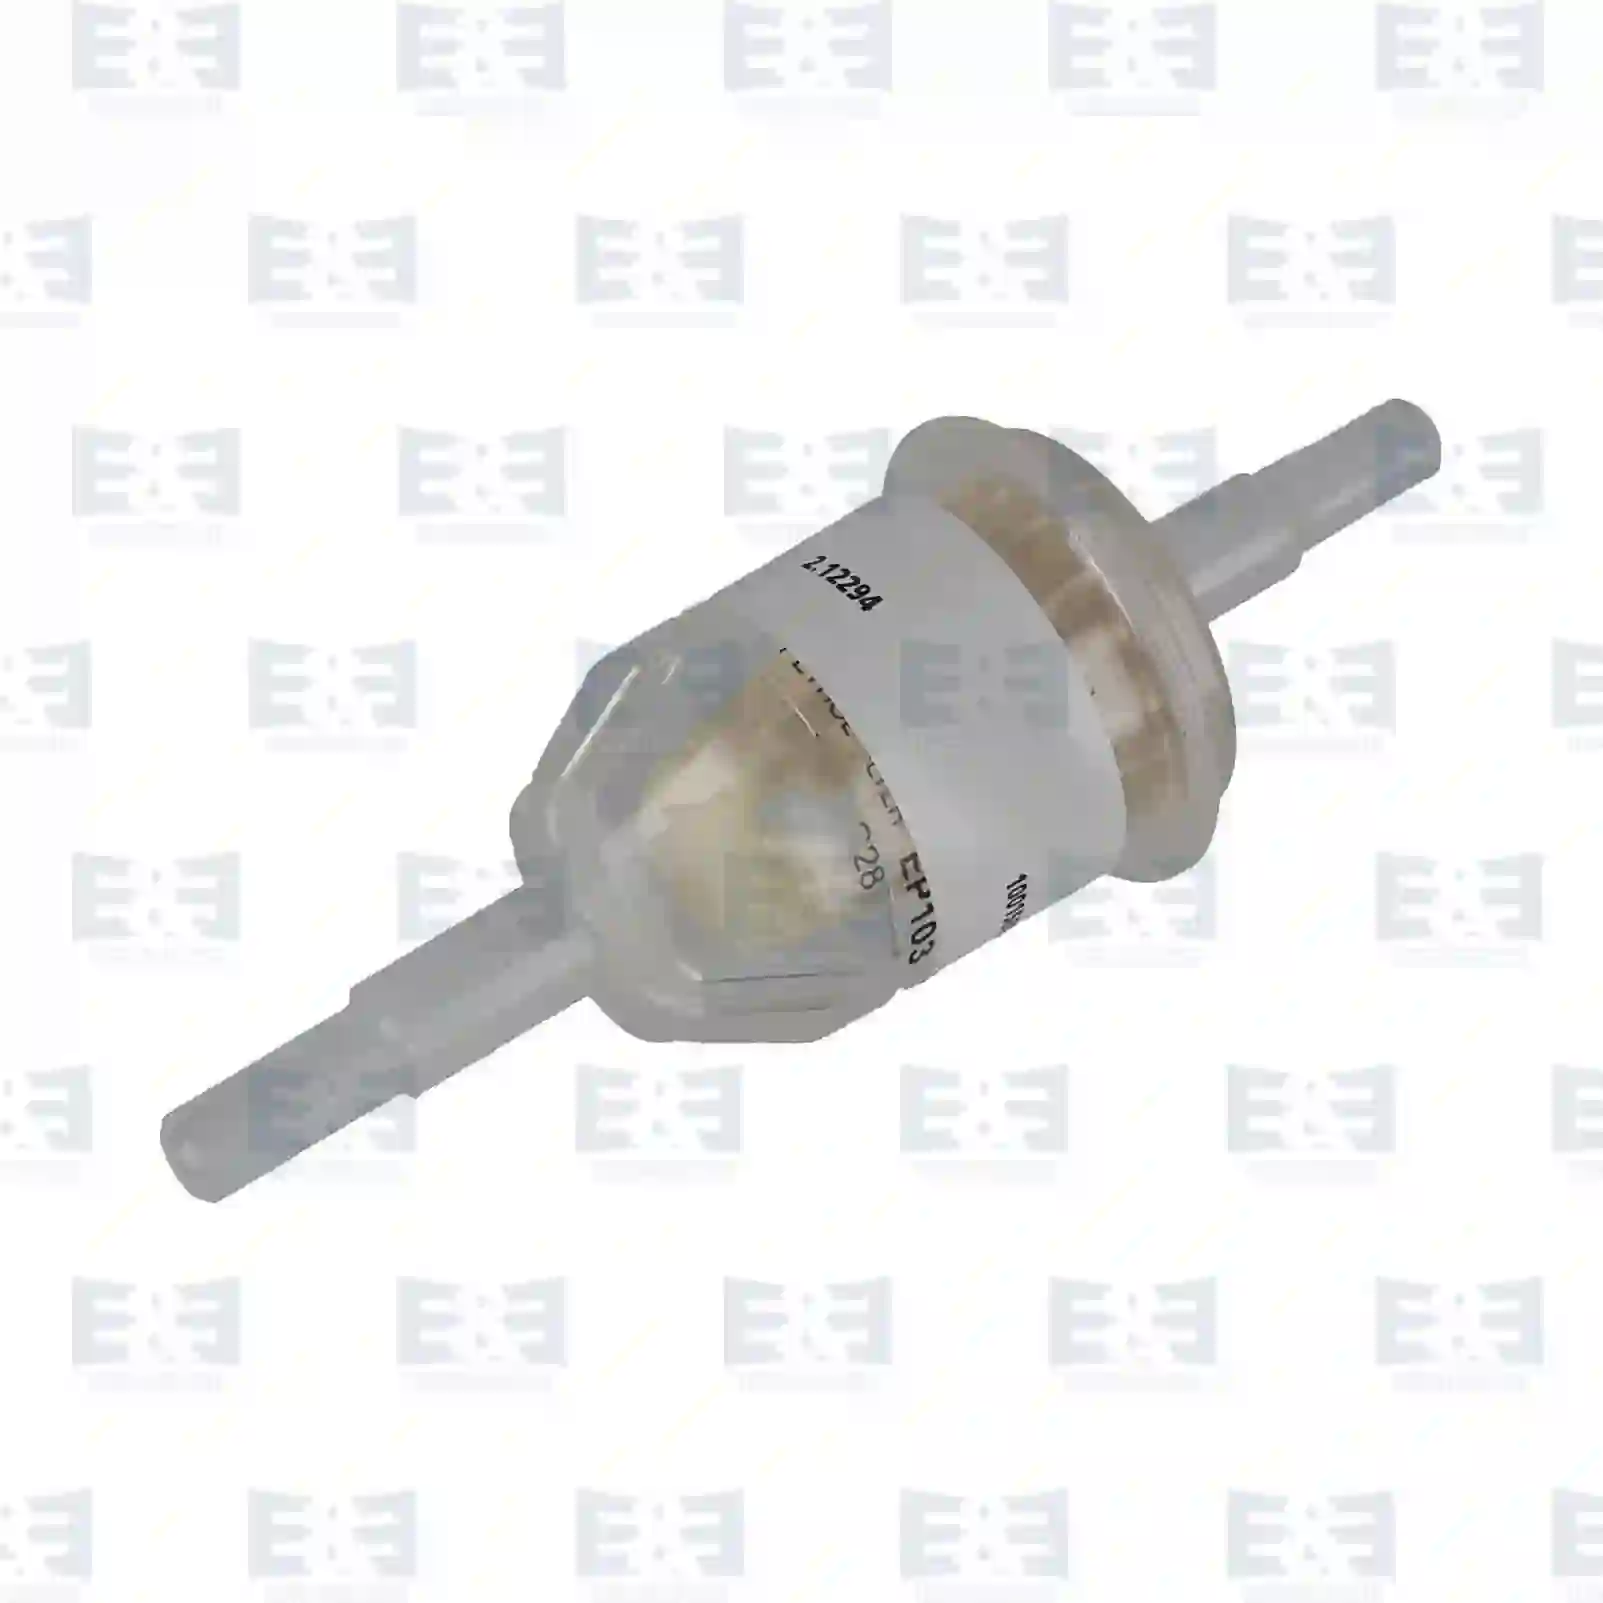 Fuel Filter, cpl. Pipe filter, fuel, EE No 2E2287141 ,  oem no:1278272, 3I-1489, 5410702, H835200730200, 7437000104, 559221342, AM101126, AM104639, AM107871, AM116178, AM116304, AM38708, M151868, MG269212, 58312099052, 111620, 022223420A, 16400-F2600, 1492005, 1492137, 1492206, 149220601, 7285943, 6100034, 38840, 464728 E&E Truck Spare Parts | Truck Spare Parts, Auotomotive Spare Parts